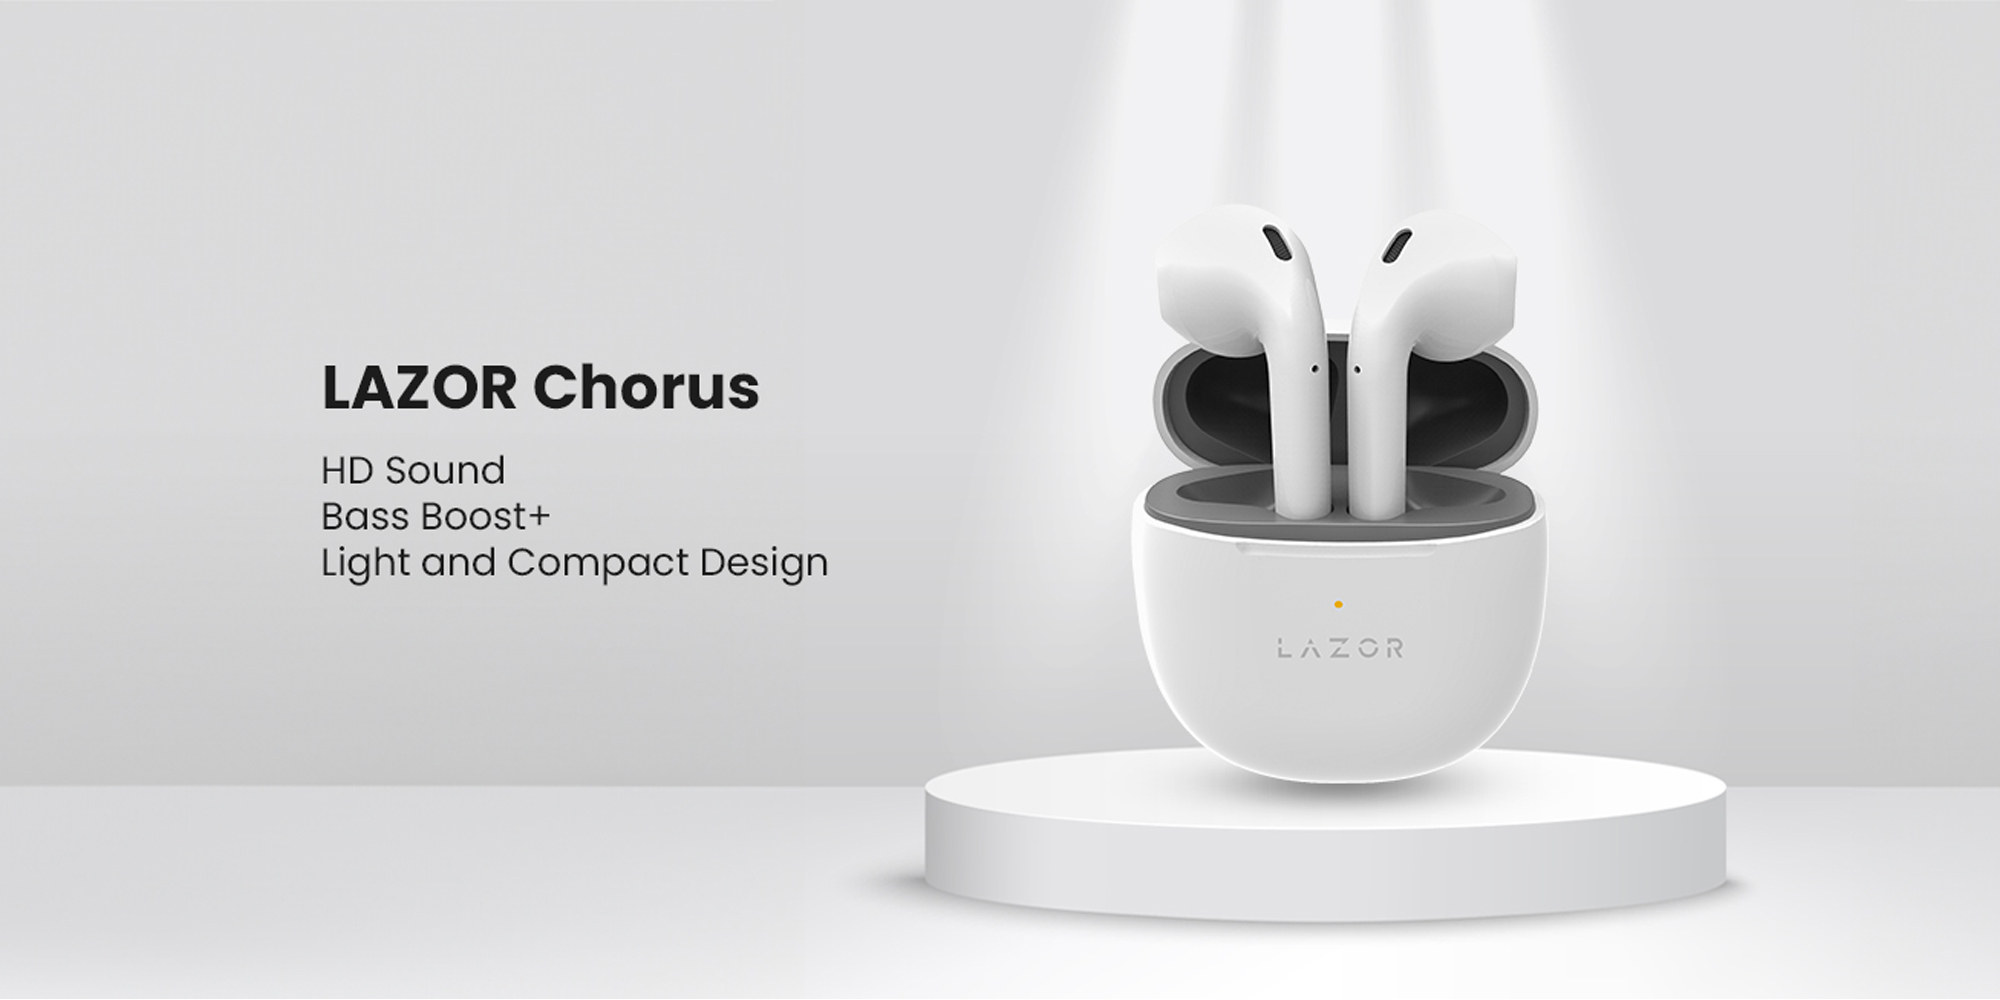 Lazor Chorus EA238: Dual Band TWS Earphones with HD Sound, Touch Control, BT V5.0, Bass Boost+, Type-C Charging - White